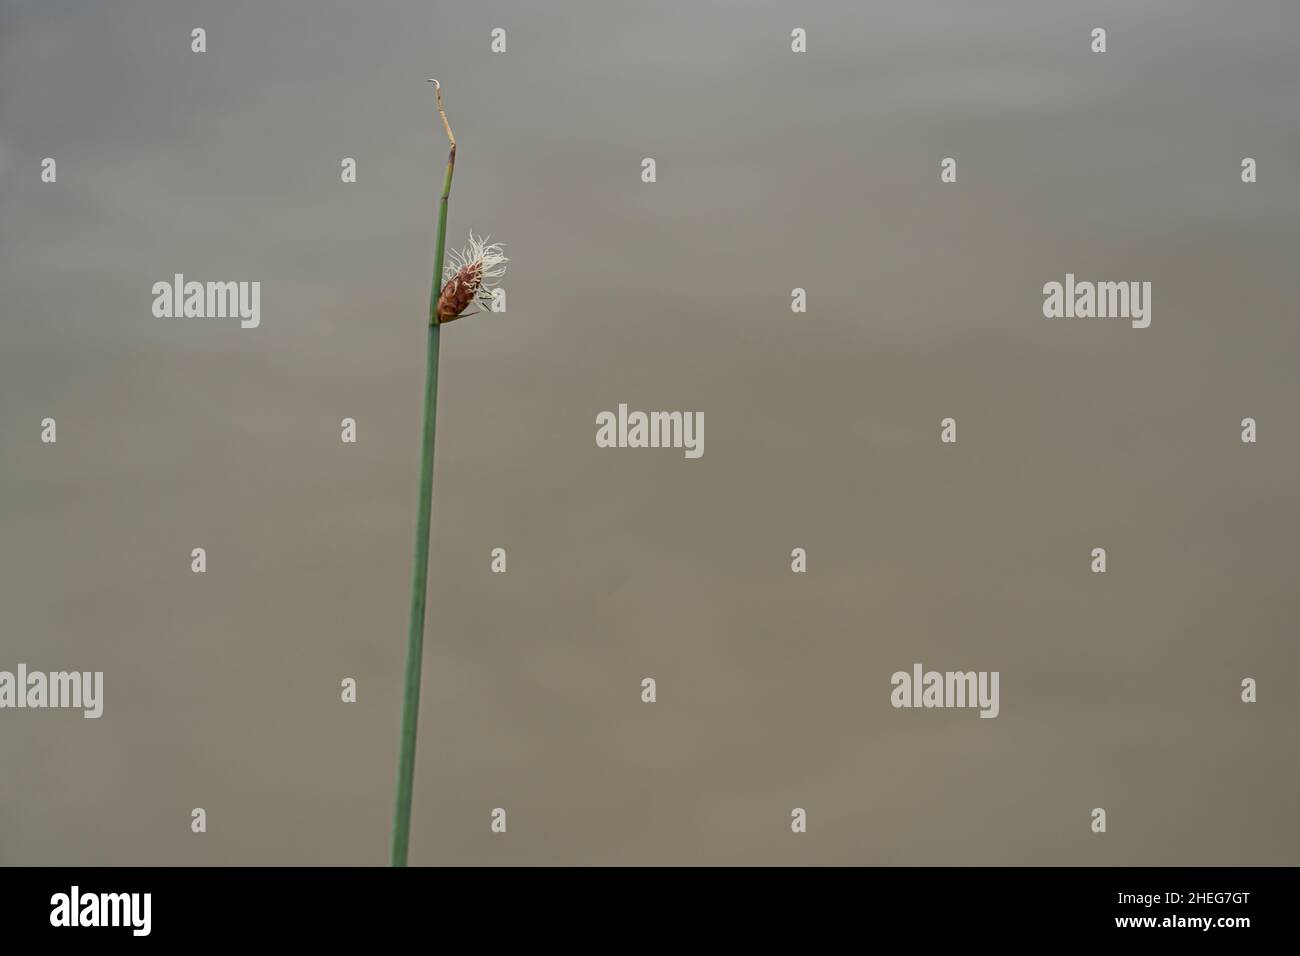 Page 3 - Reed Mats High Resolution Stock Photography and Images - Alamy